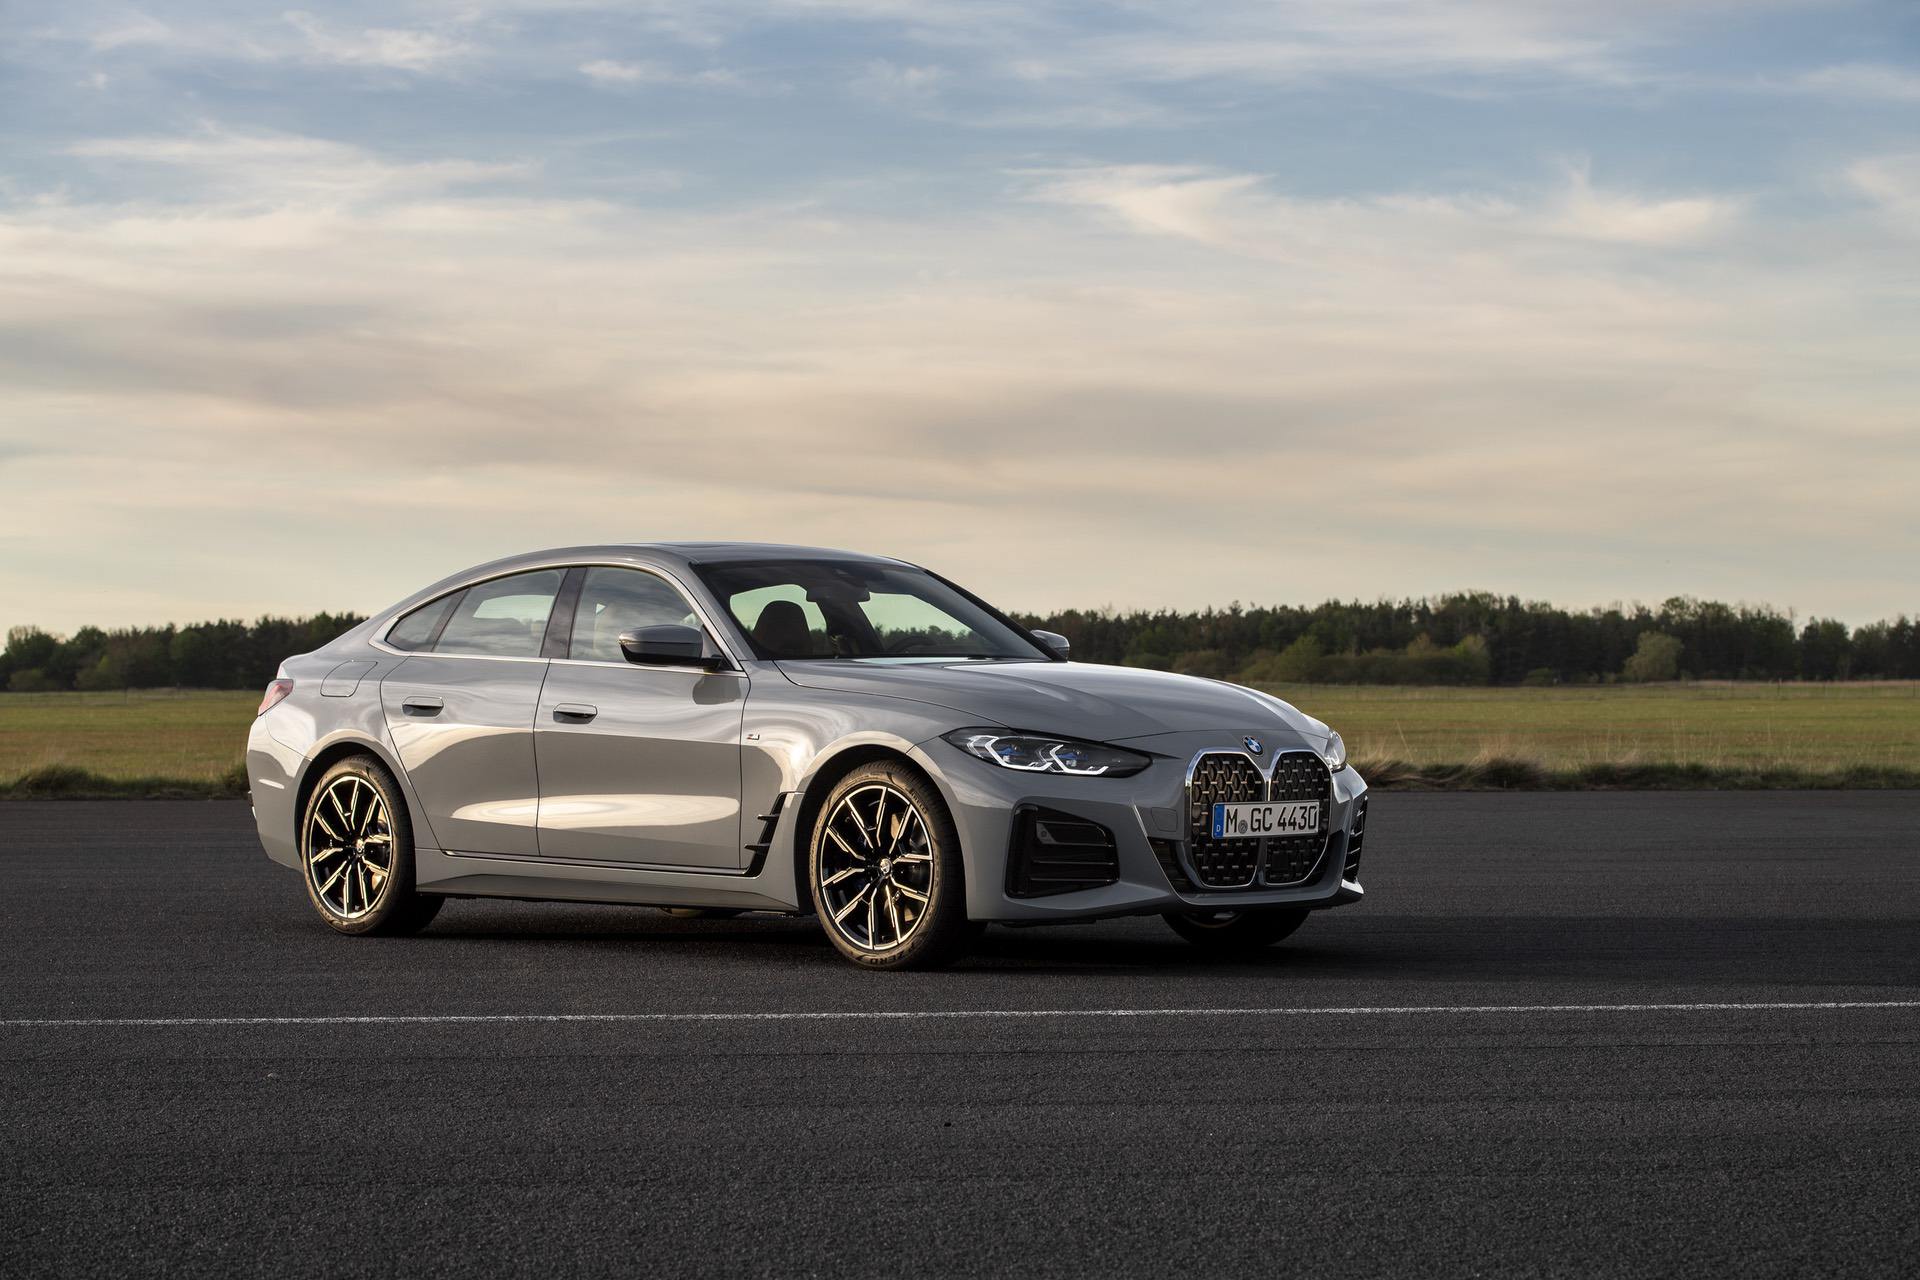 BMW 4 Series Gran Coupe Gets 430i xDrive Version And New Options